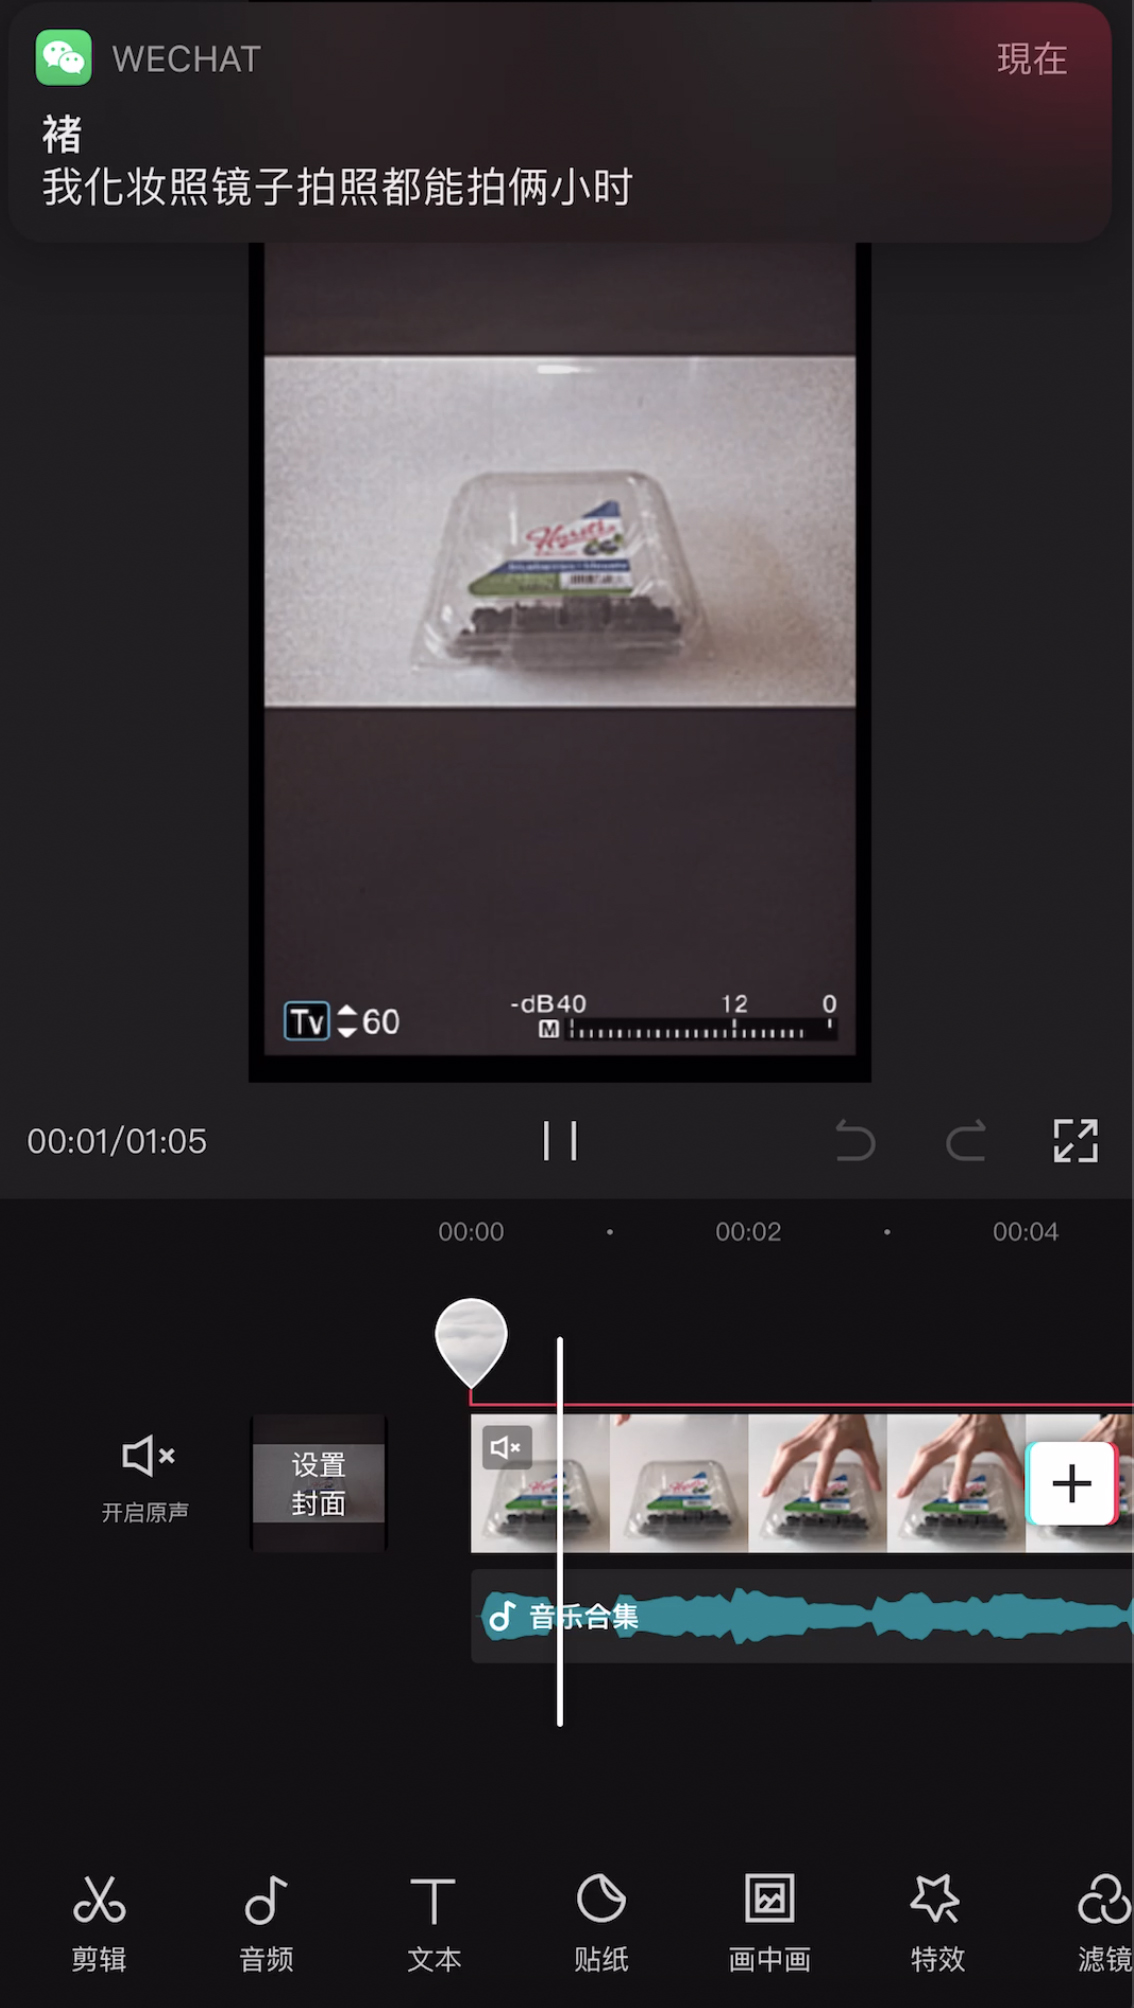 Video still of video editing interface presented on a phone.